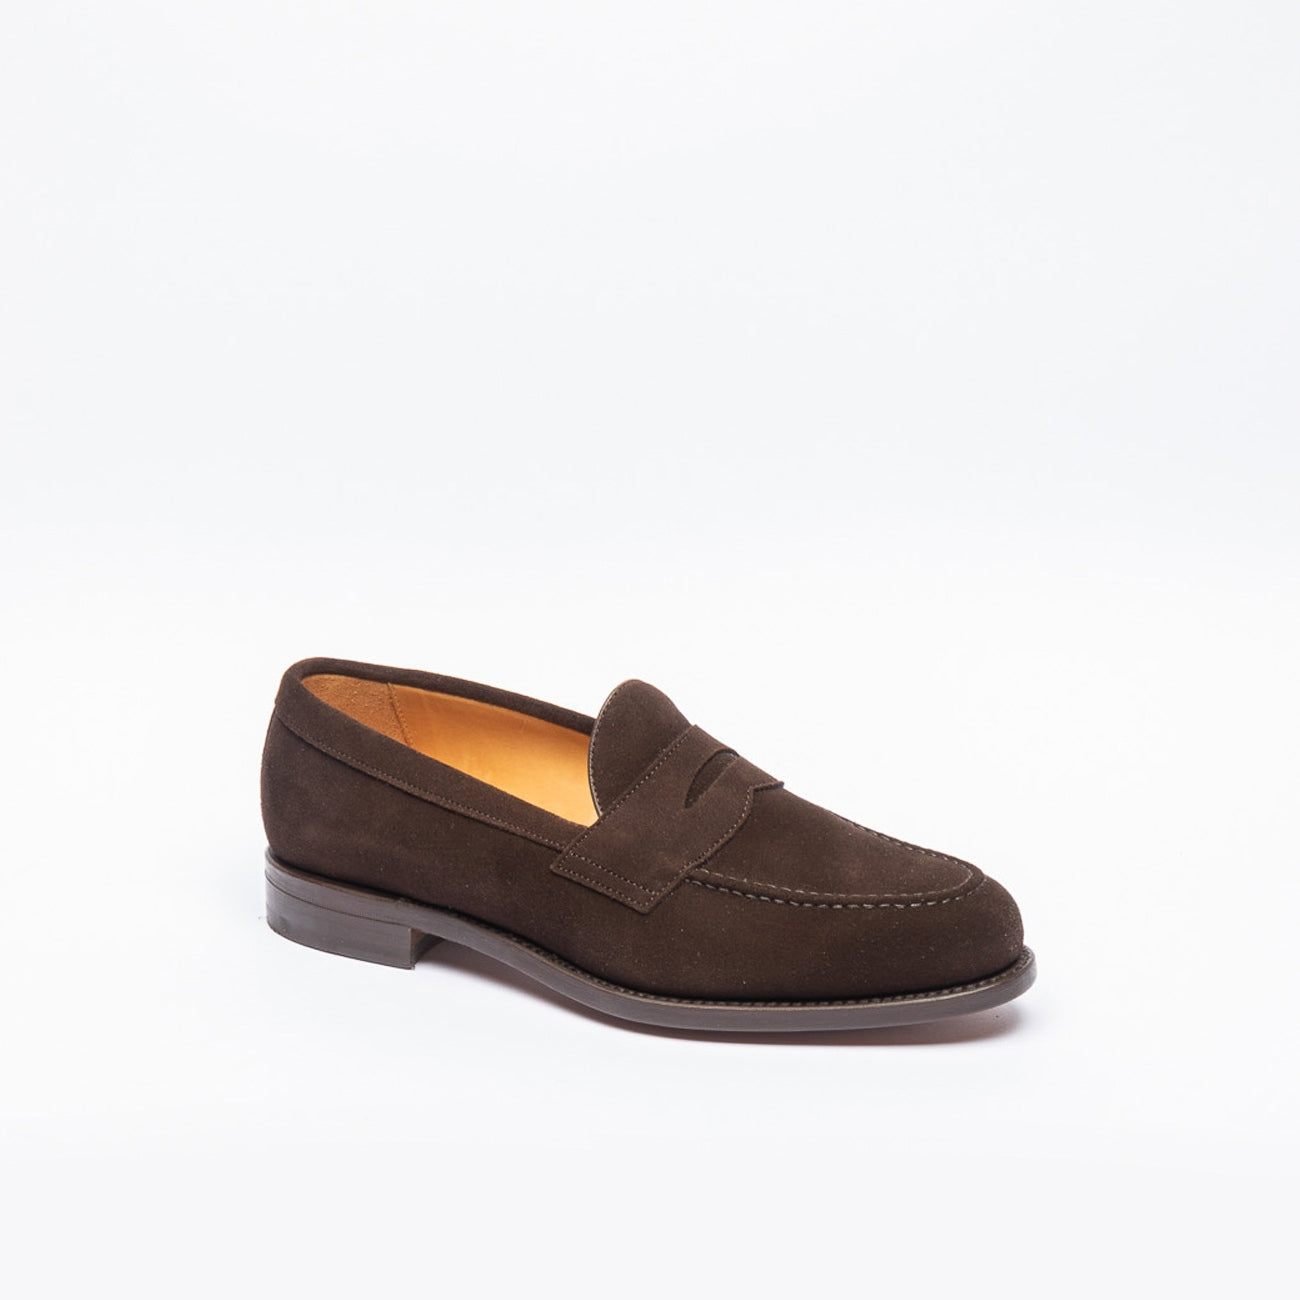 Berwick brown suede loafer